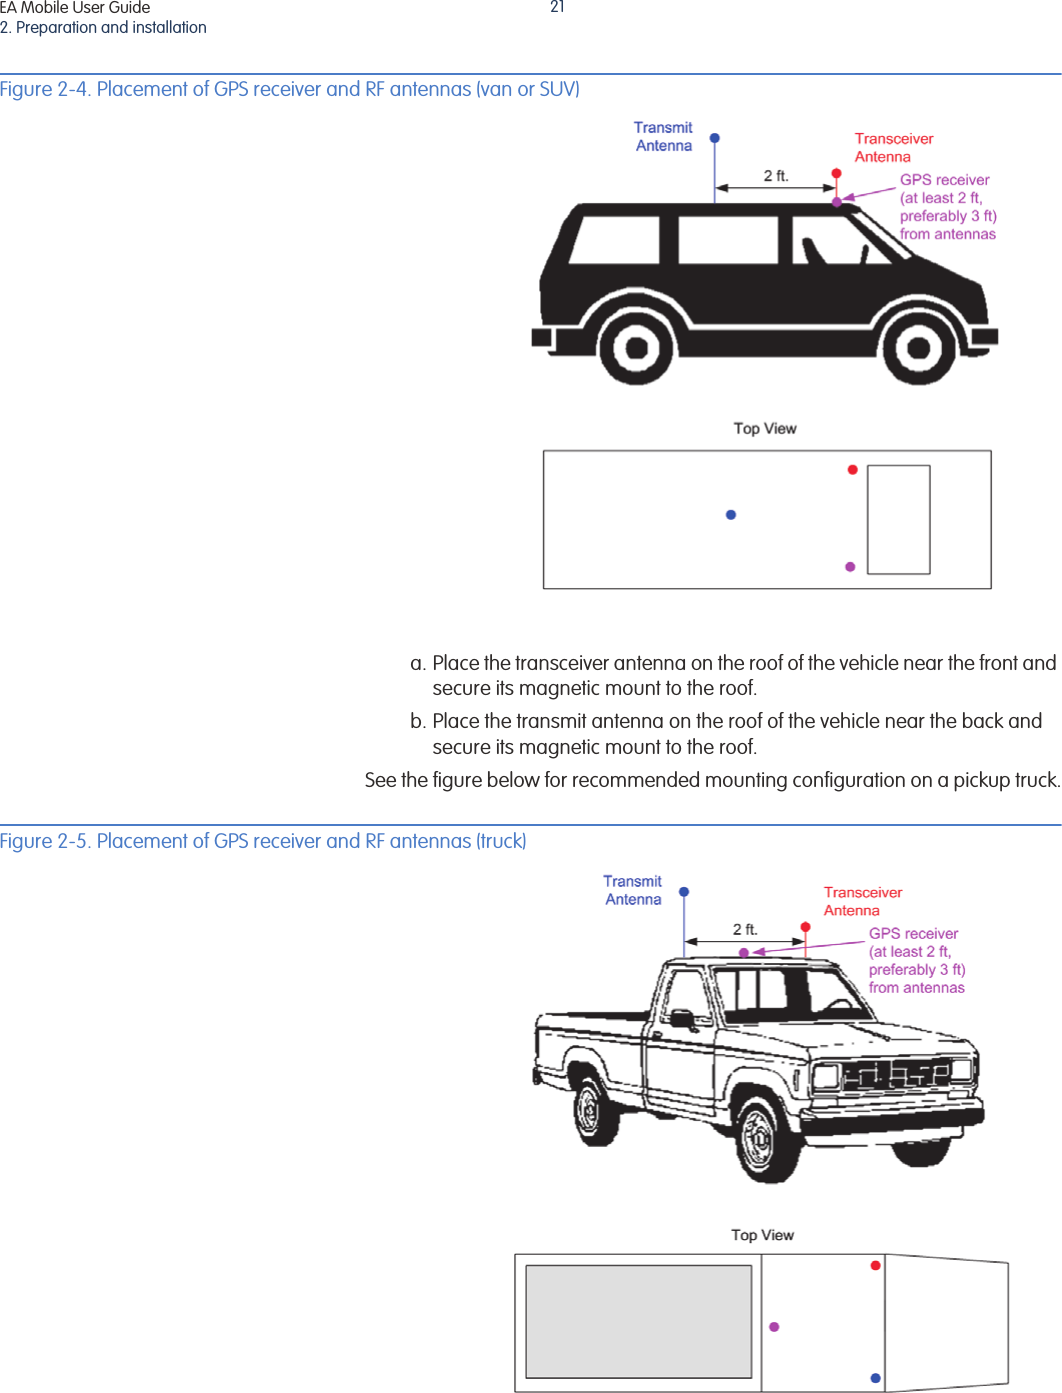 EA Mobile User Guide2. Preparation and installation21Figure 2-4. Placement of GPS receiver and RF antennas (van or SUV)a. Place the transceiver antenna on the roof of the vehicle near the front and secure its magnetic mount to the roof.b. Place the transmit antenna on the roof of the vehicle near the back and secure its magnetic mount to the roof.See the figure below for recommended mounting configuration on a pickup truck.Figure 2-5. Placement of GPS receiver and RF antennas (truck)